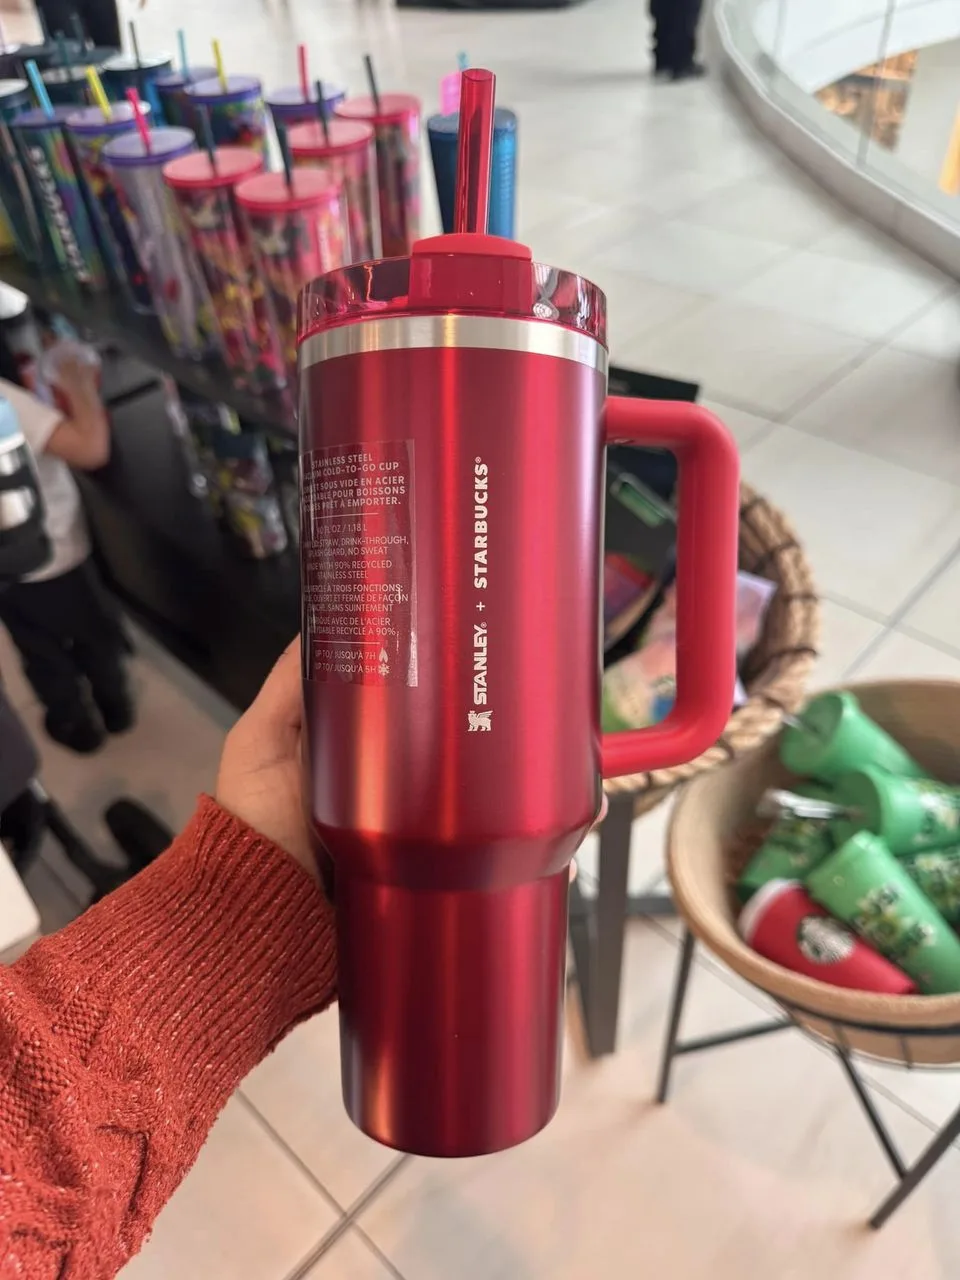 Starbucks Released Red Stanley Cups For The Holidays and People Are Losing  Their Minds